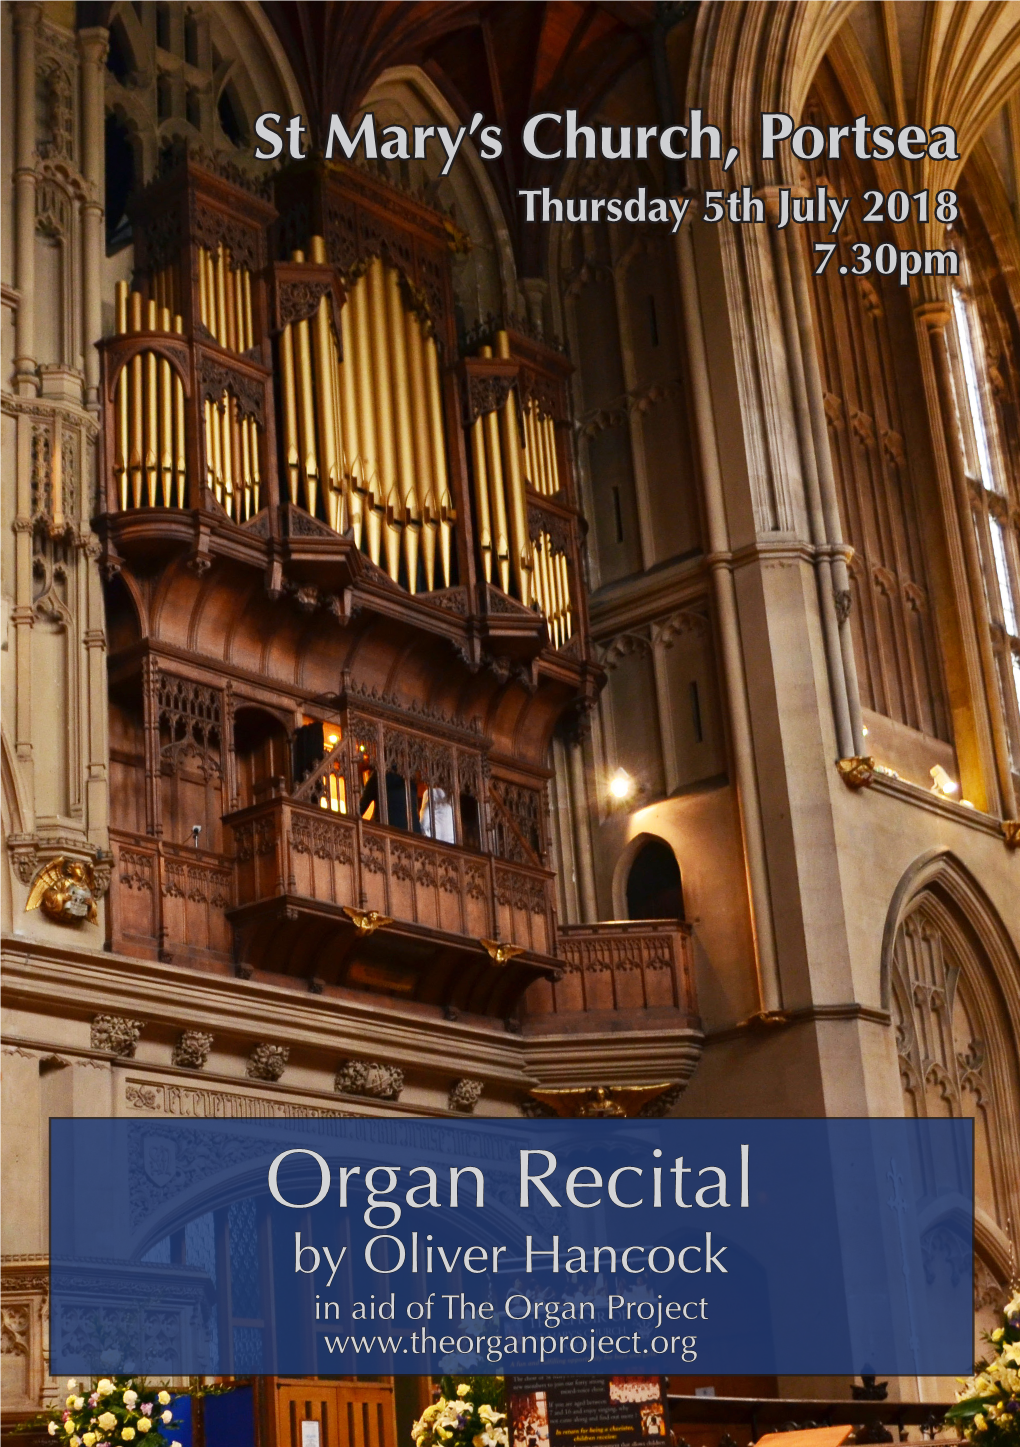 Organ Recital by Oliver Hancock in Aid of the Organ Project the Organ of St Mary’S